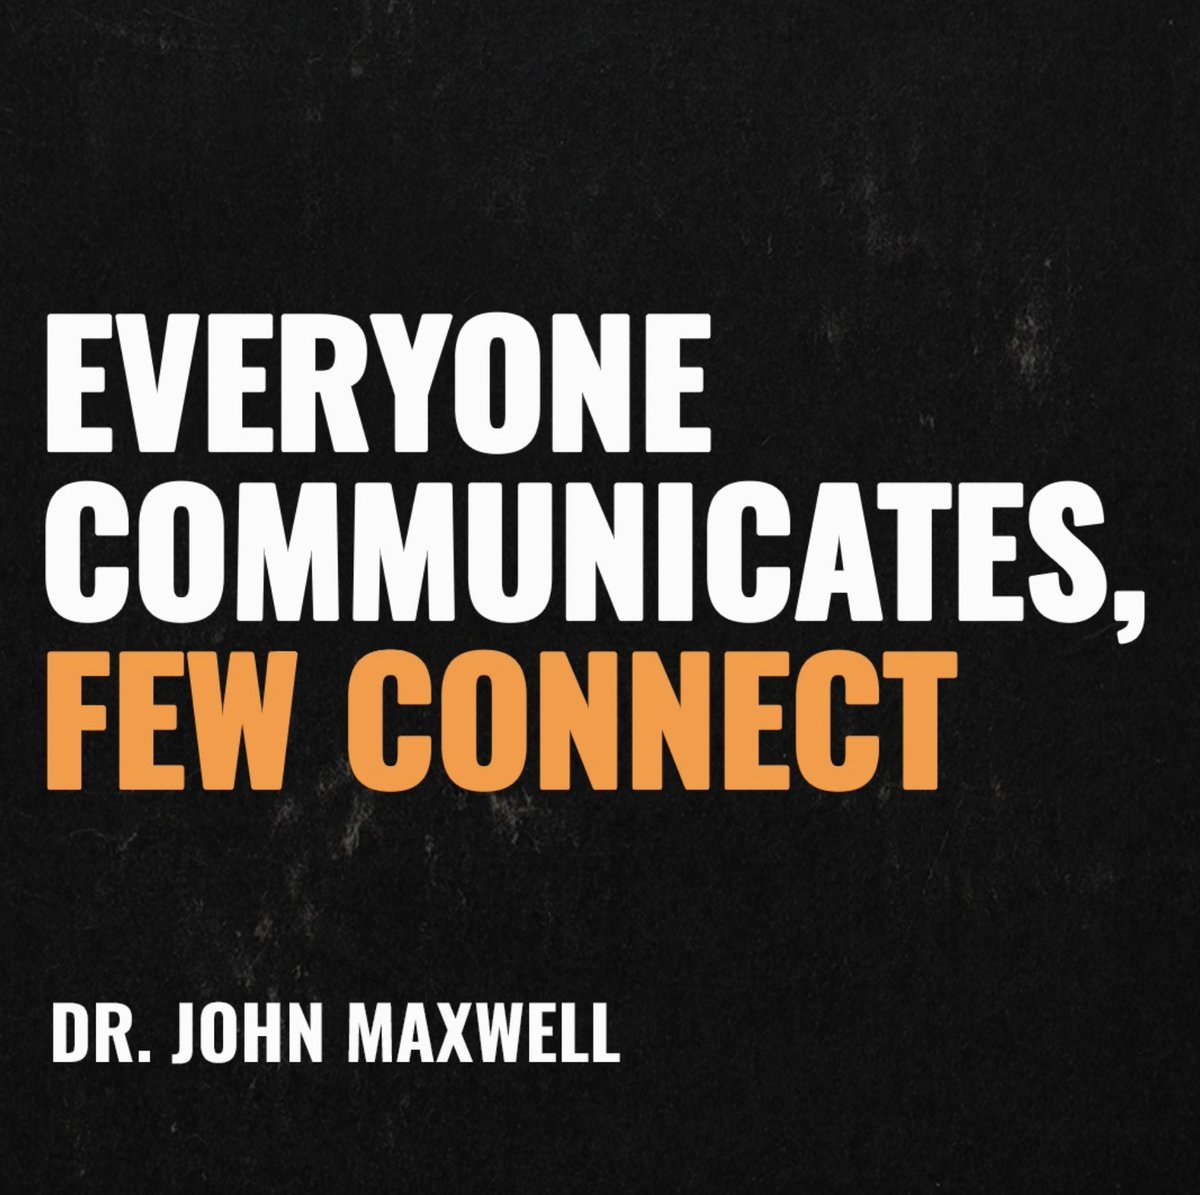 Such incredibly true words from Dr John Maxwell.

What are the ways you connect with someone through communication?

#connection #connect #communicate #communication #healthycommunicaion #speakwithpeople #leadwithpeople